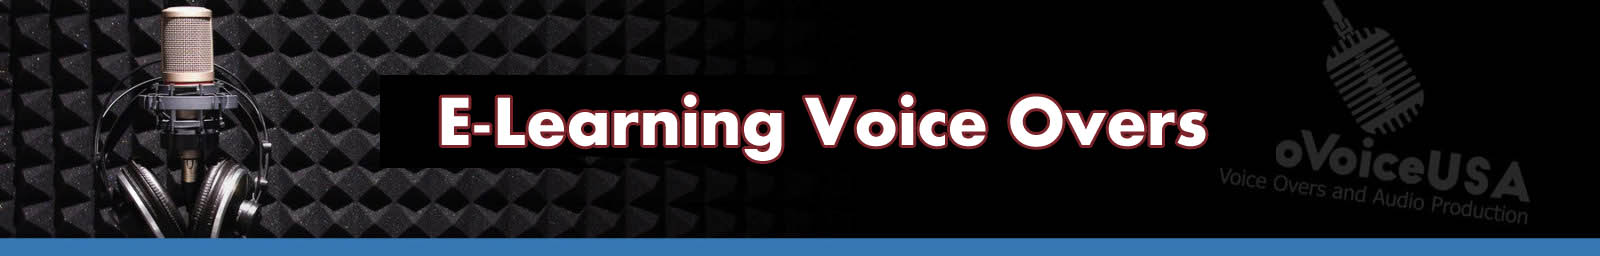 e-learning Voice Overs | American Voice Recording Service | ProVoice USA